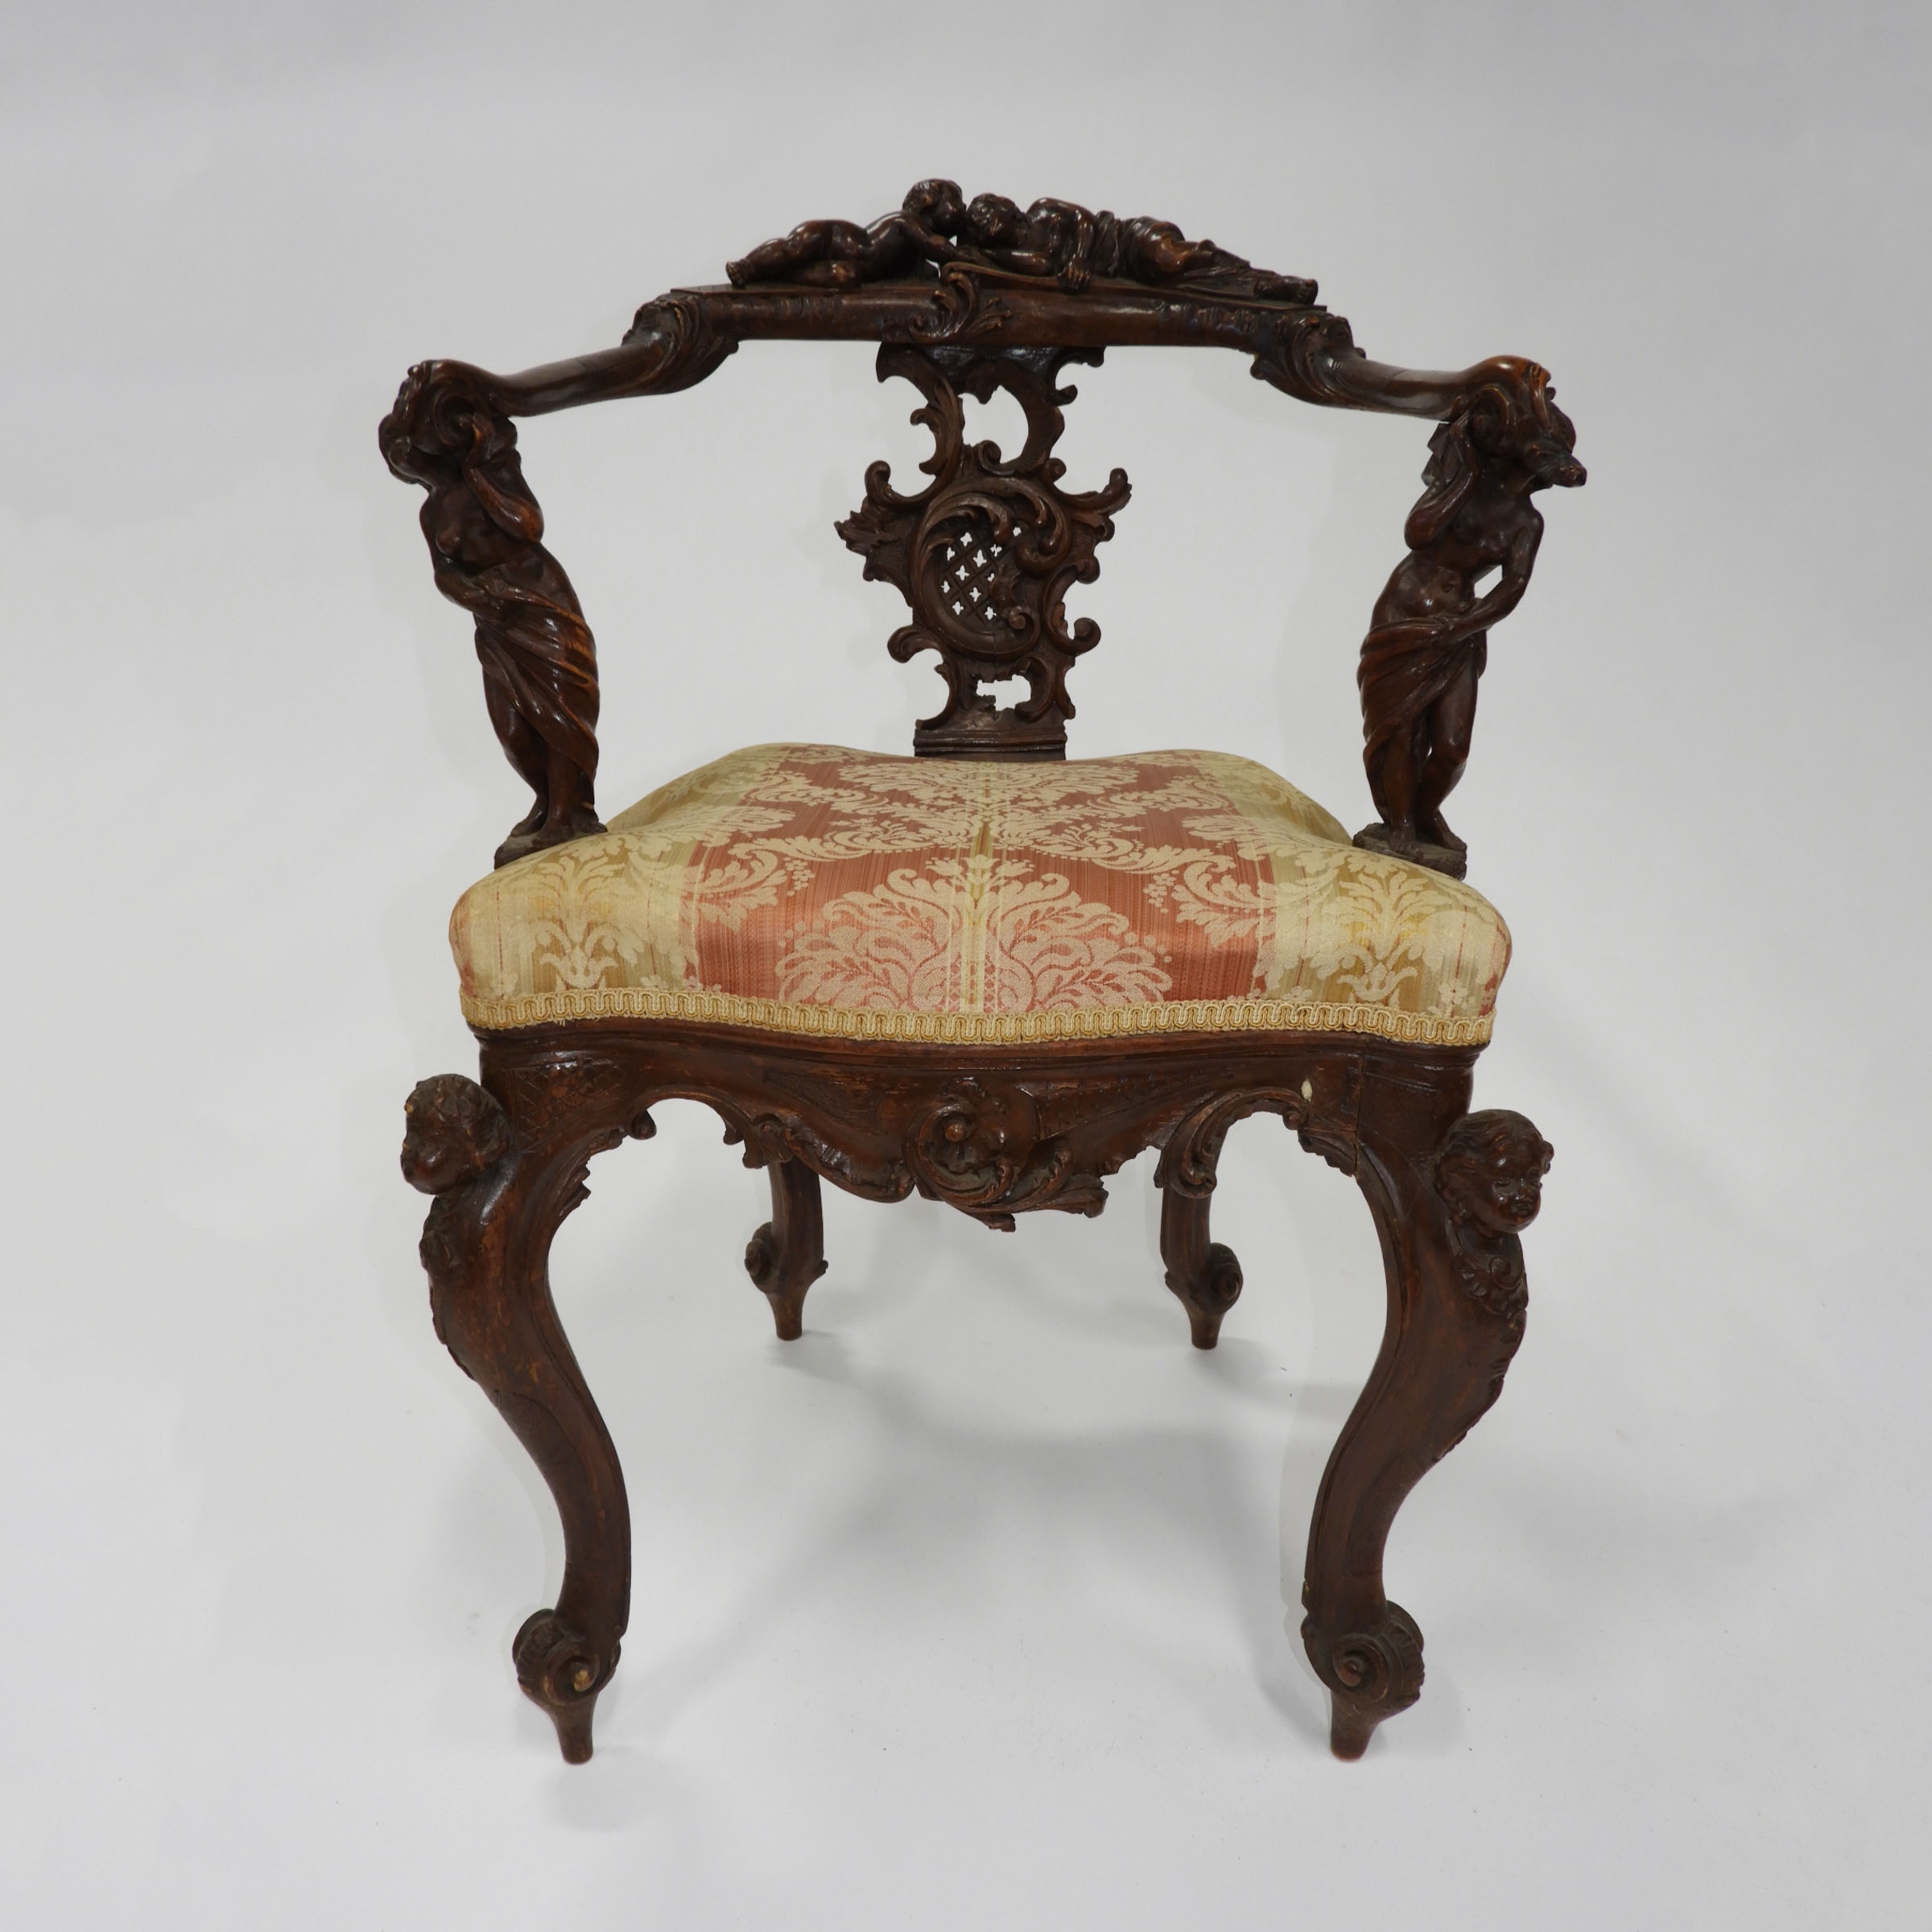 Venetian Baroque Carved Walnut Open Armchair, early 18th/early 19th century